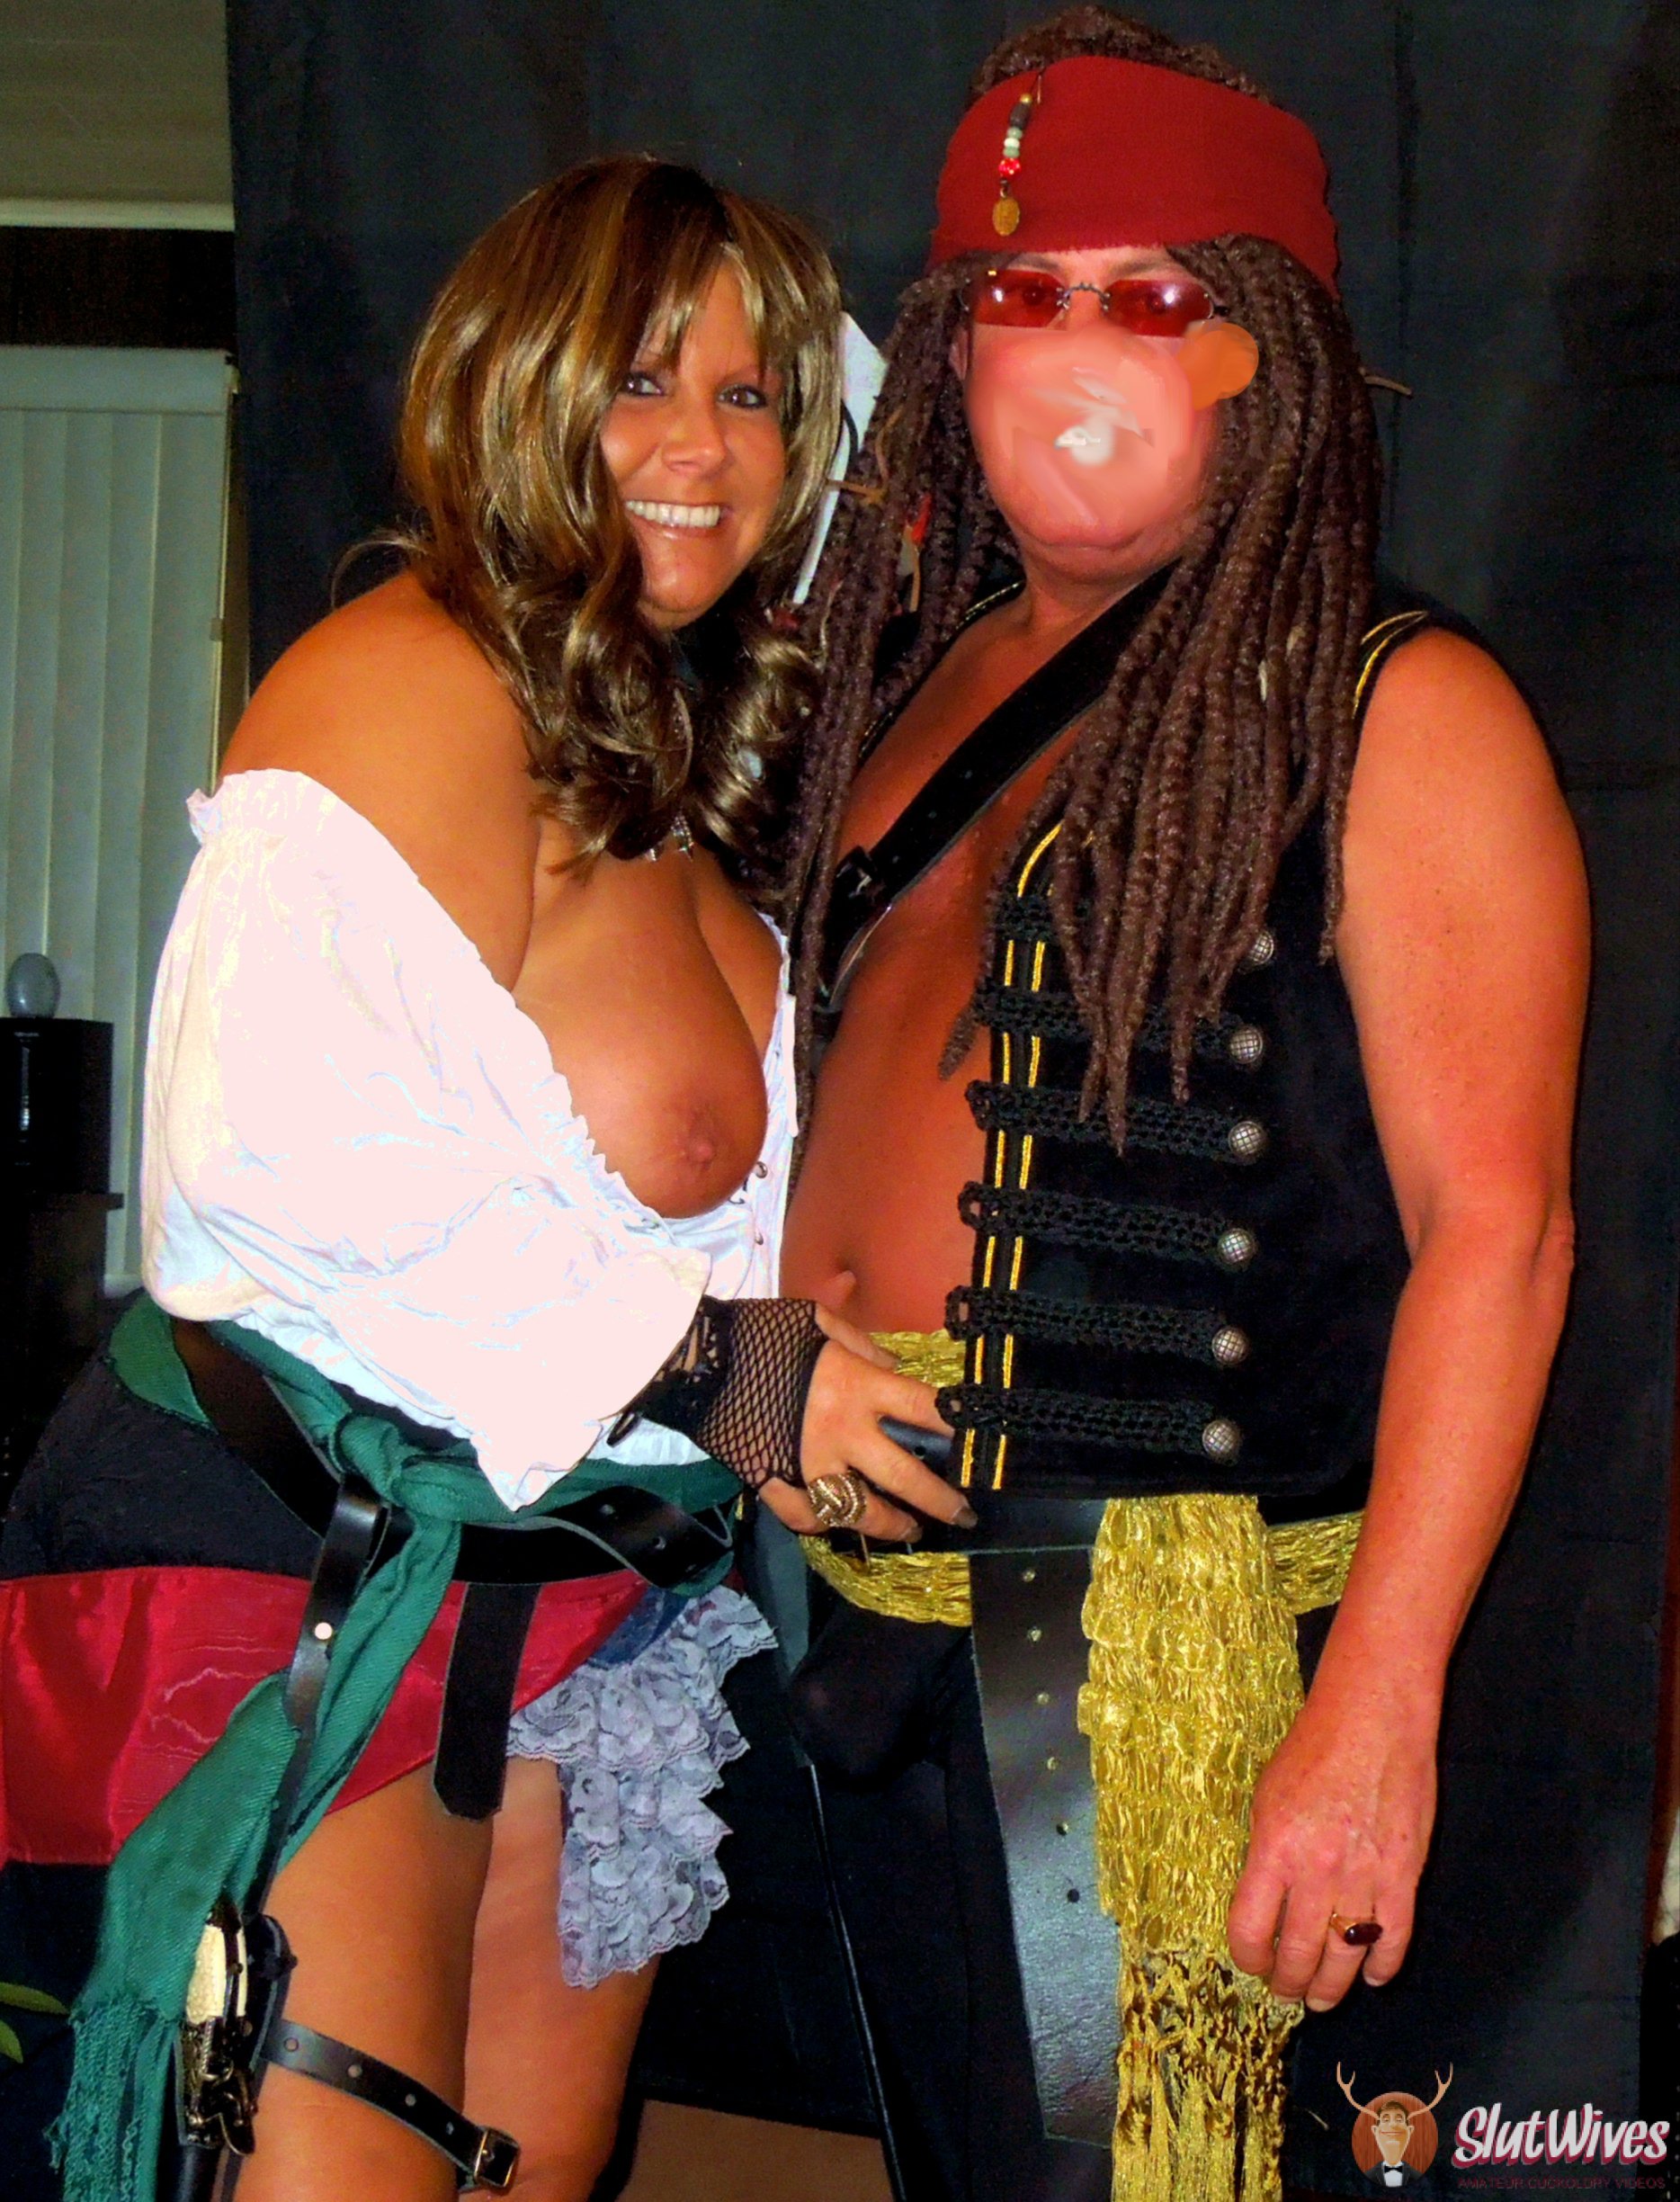 With my pirate...